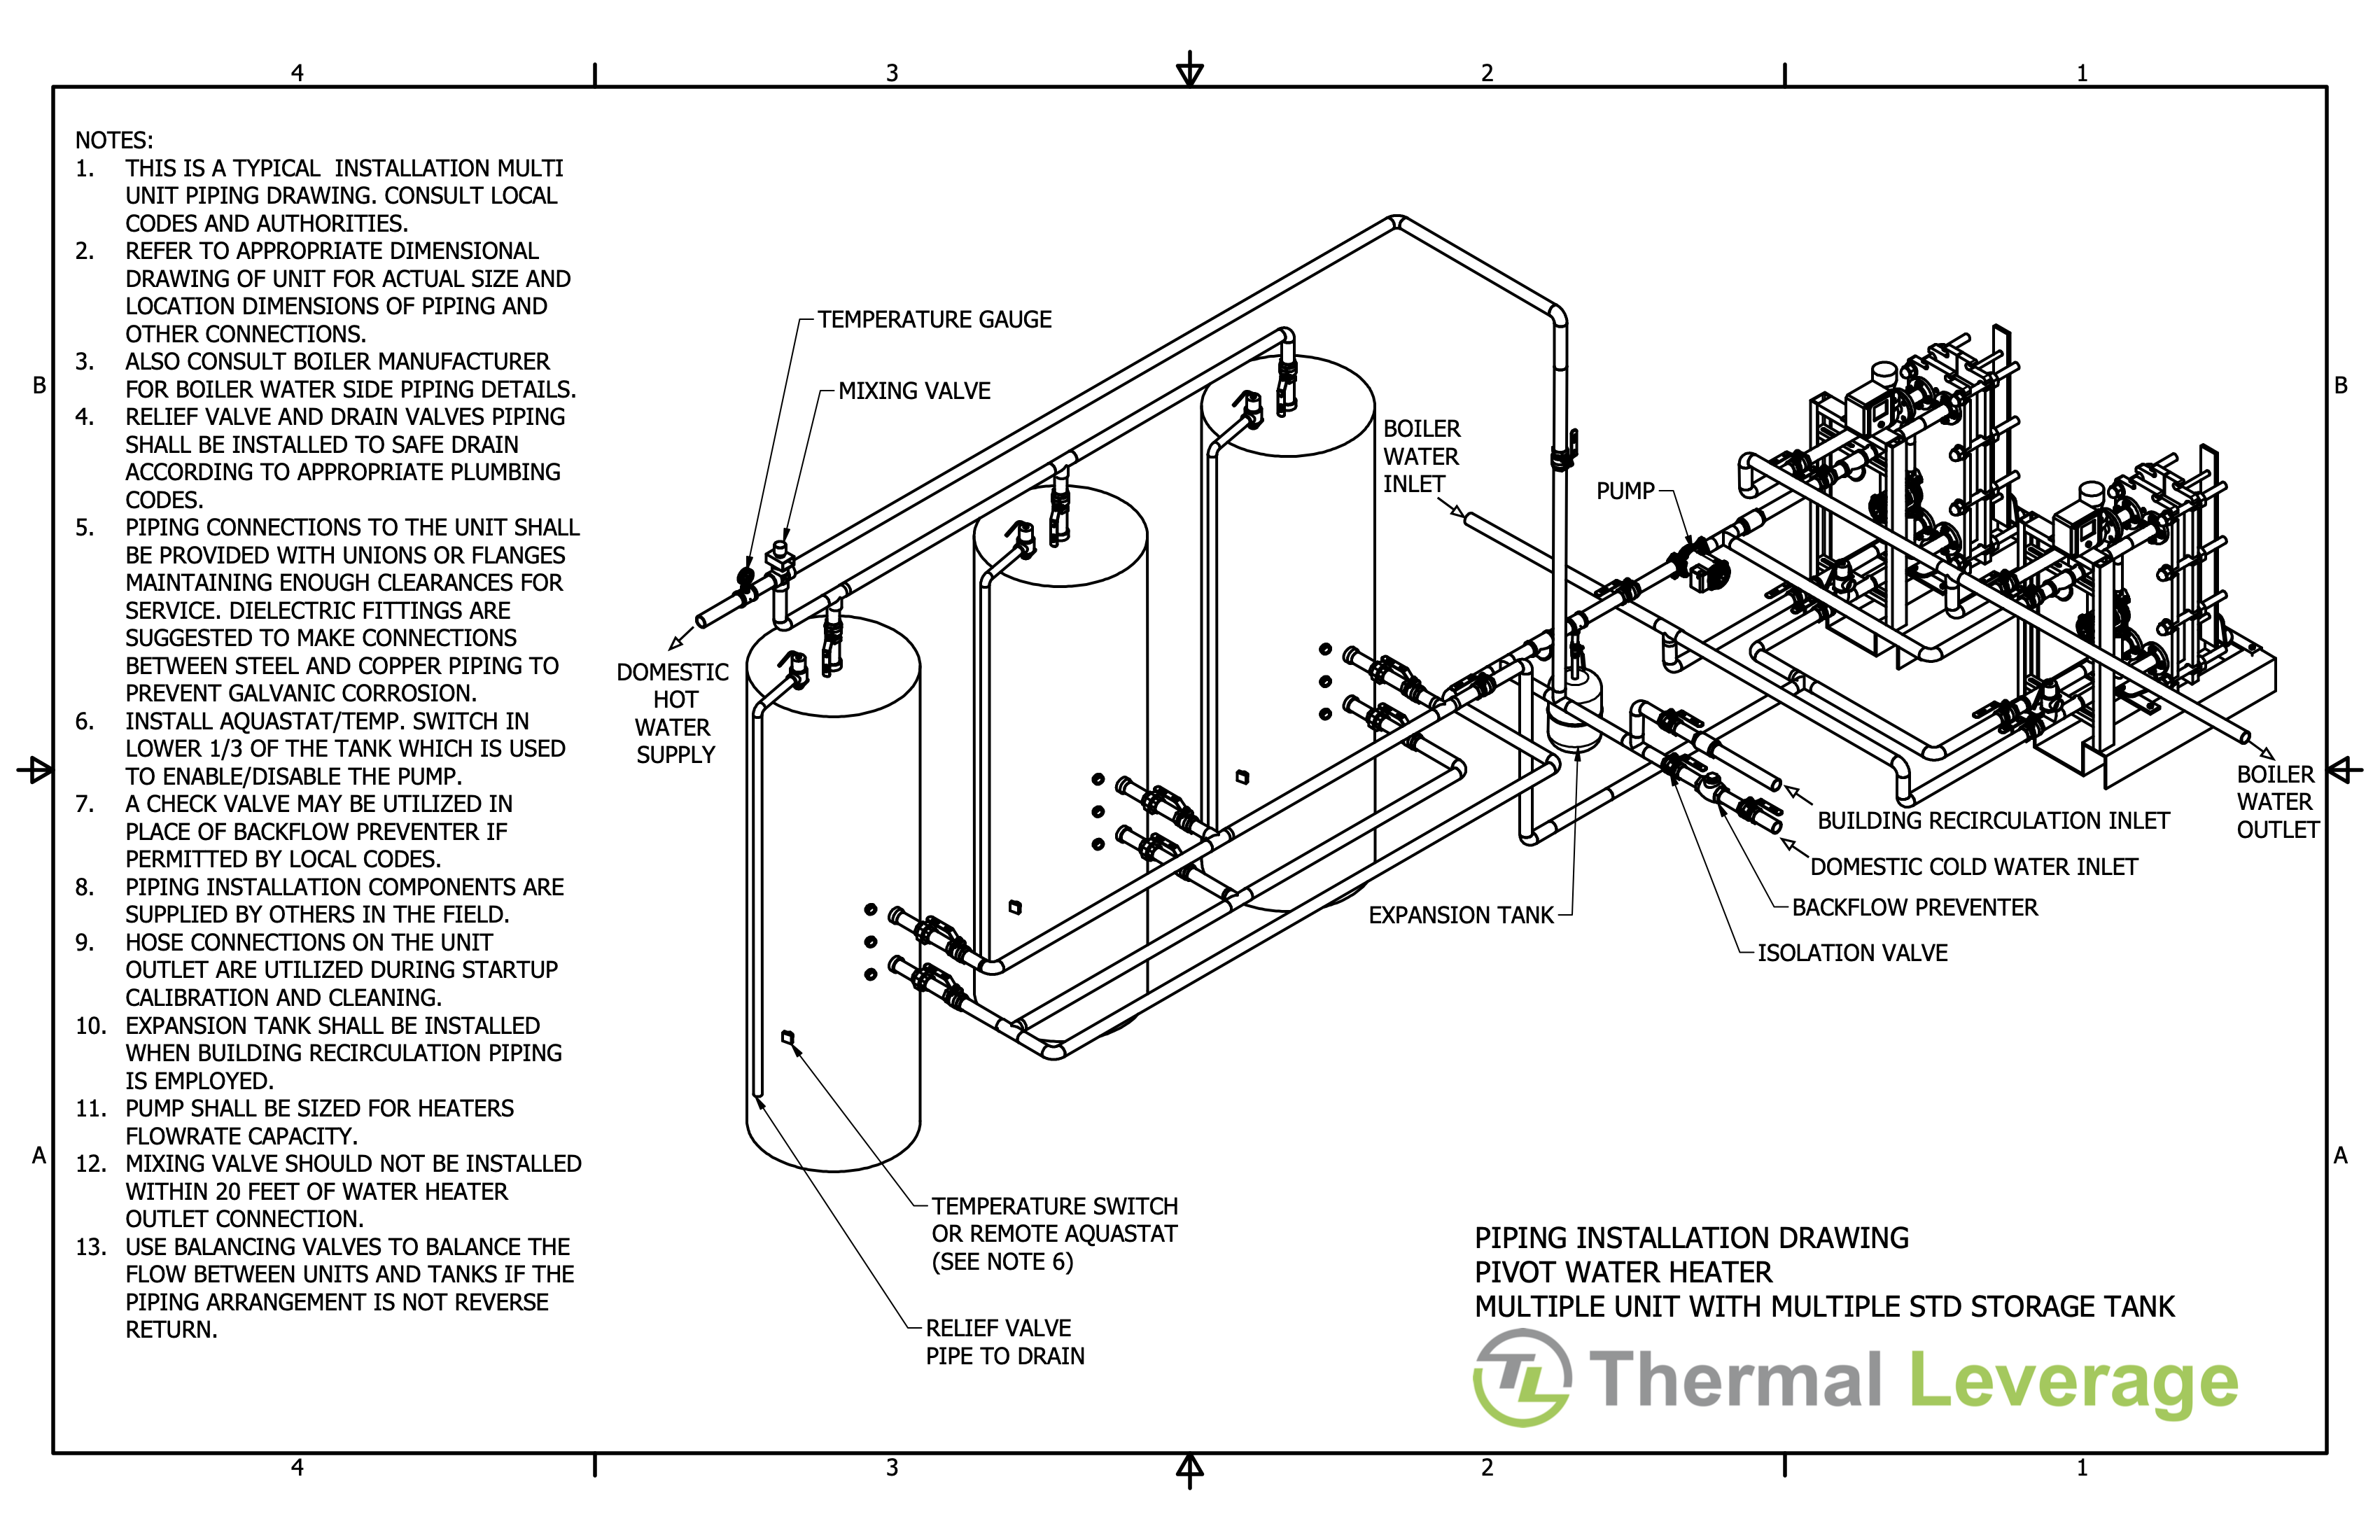 PIPING-INSTALL-DRAWING-PIVOT-WATER-HEATER-MULTIPLE-UNIT-WITH-MULTIPLE-STD-STORAGE-TANK.png